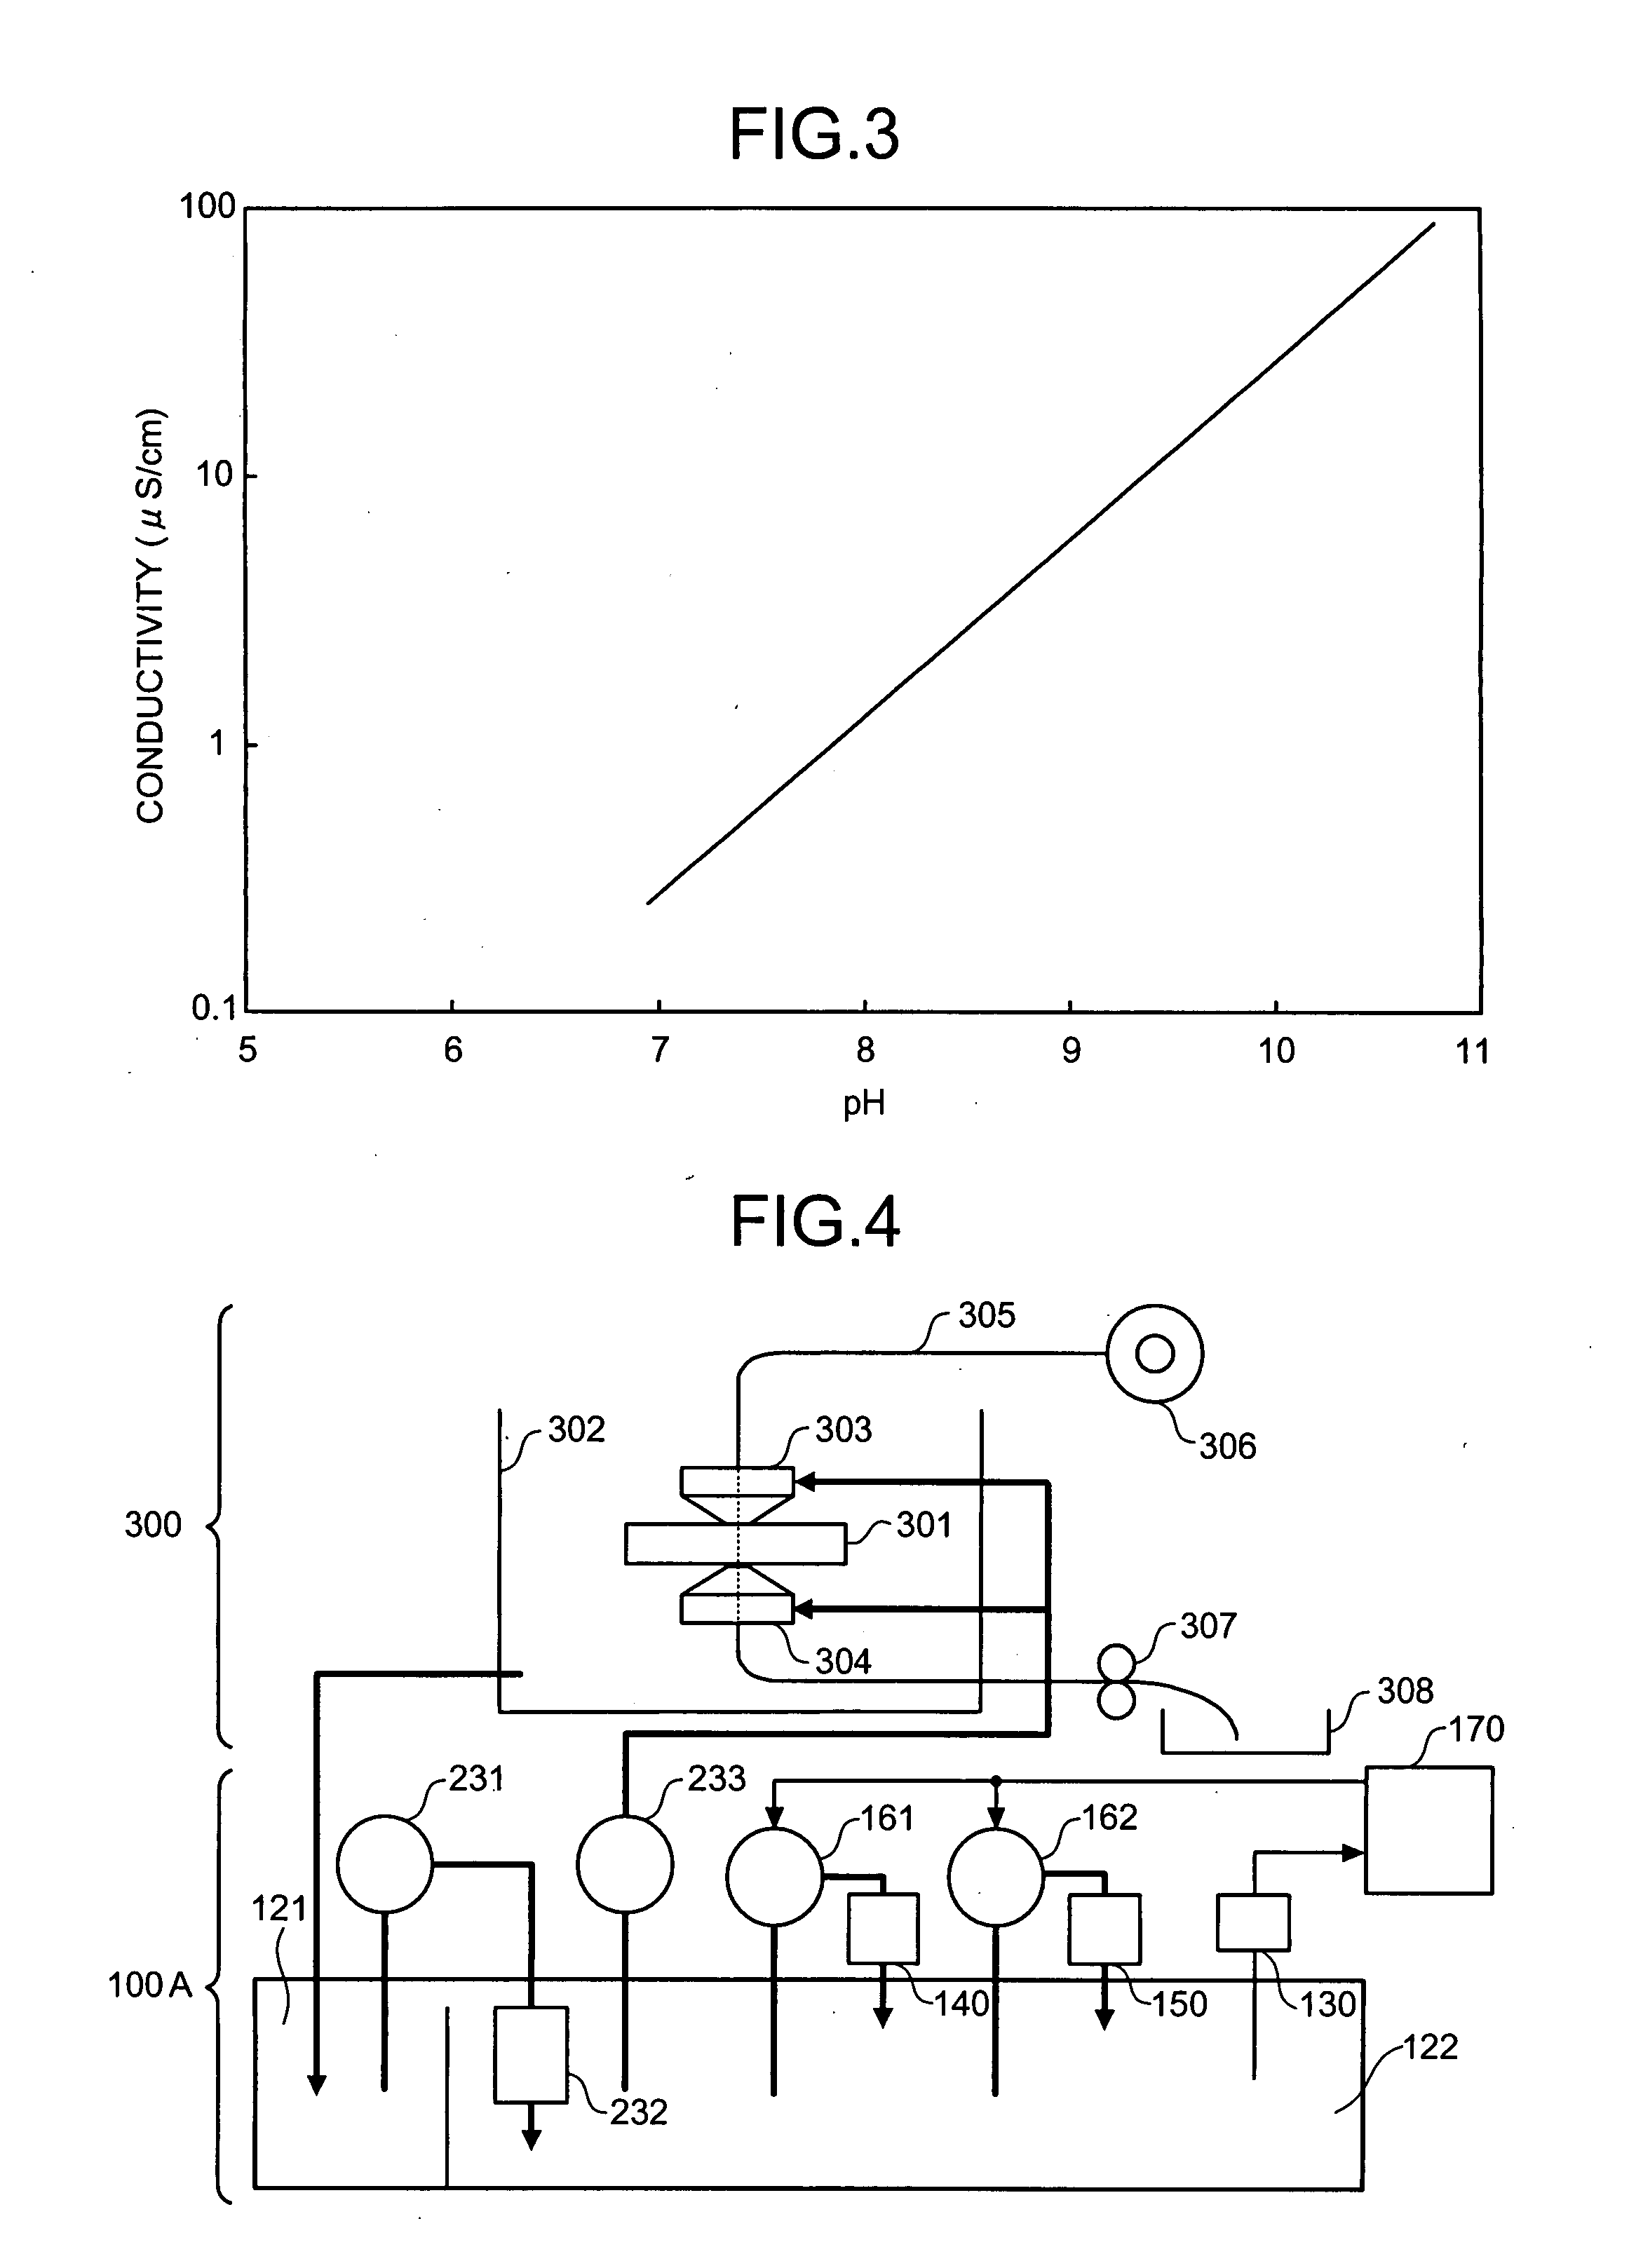 Dielectric-Fluid Quality Control Apparatus and Electrical-Discharge Machining Apparatus